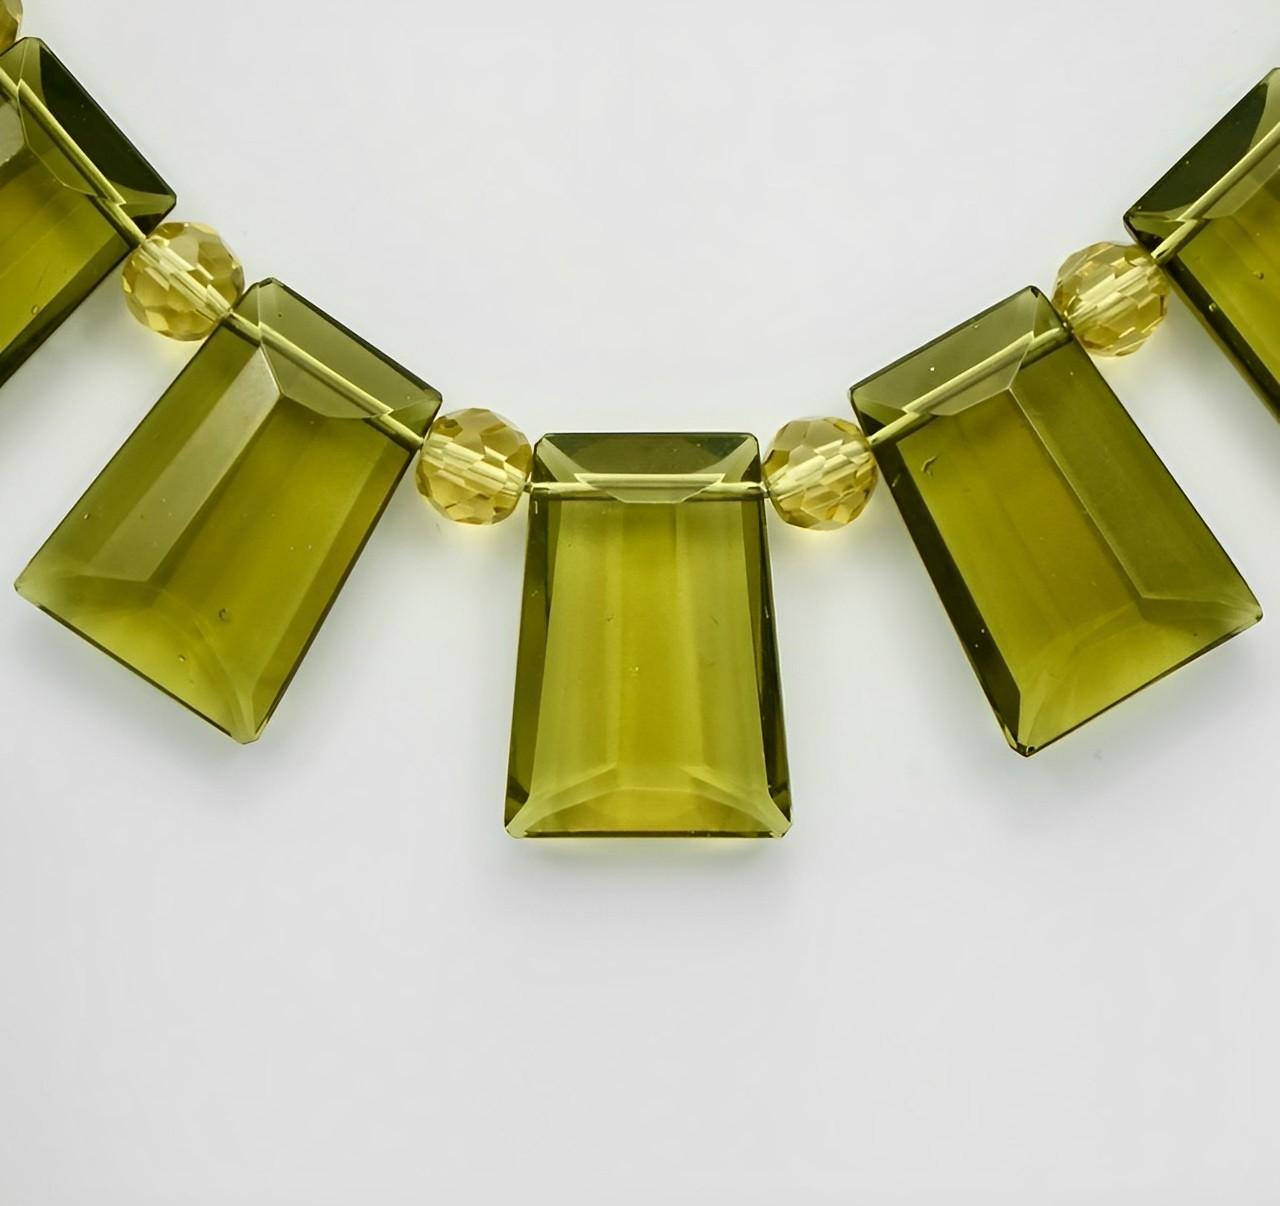 Fabulous Art Deco fringe necklace collar with classic Deco design olive green glass, interspersed with faceted beads which extend to the rest of the necklace. It fastens with a silver tone barrel clasp. The beads are strung on to wire.

The necklace